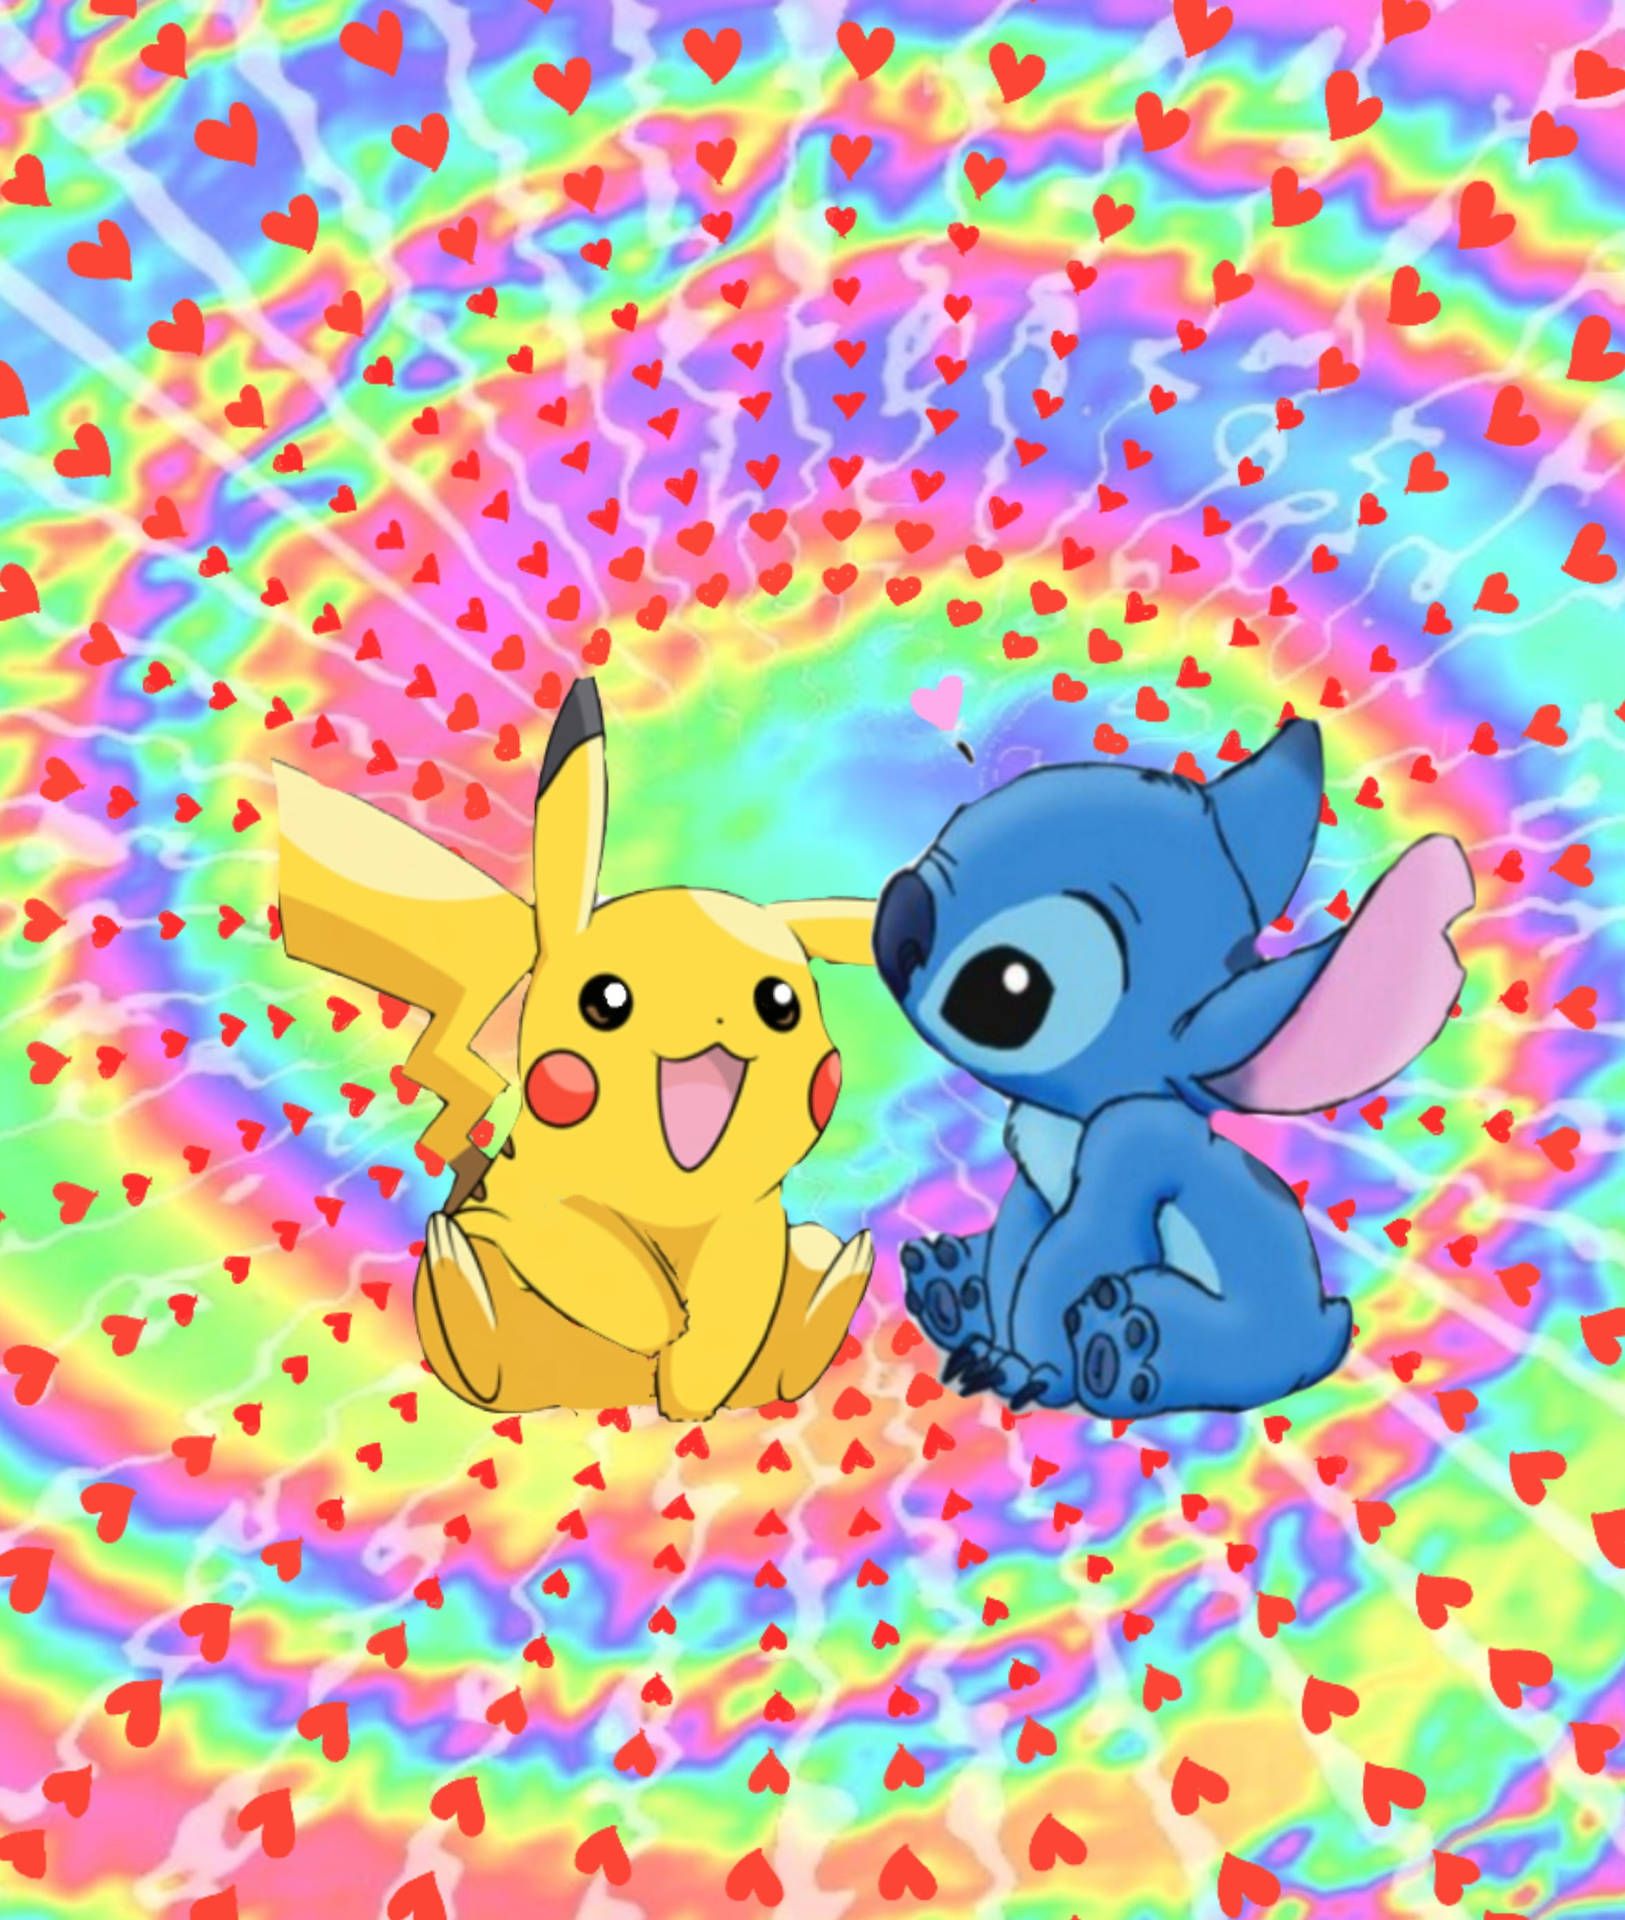 Aesthetic phone background of Pikachu and Stitch on a rainbow background with hearts - Pikachu